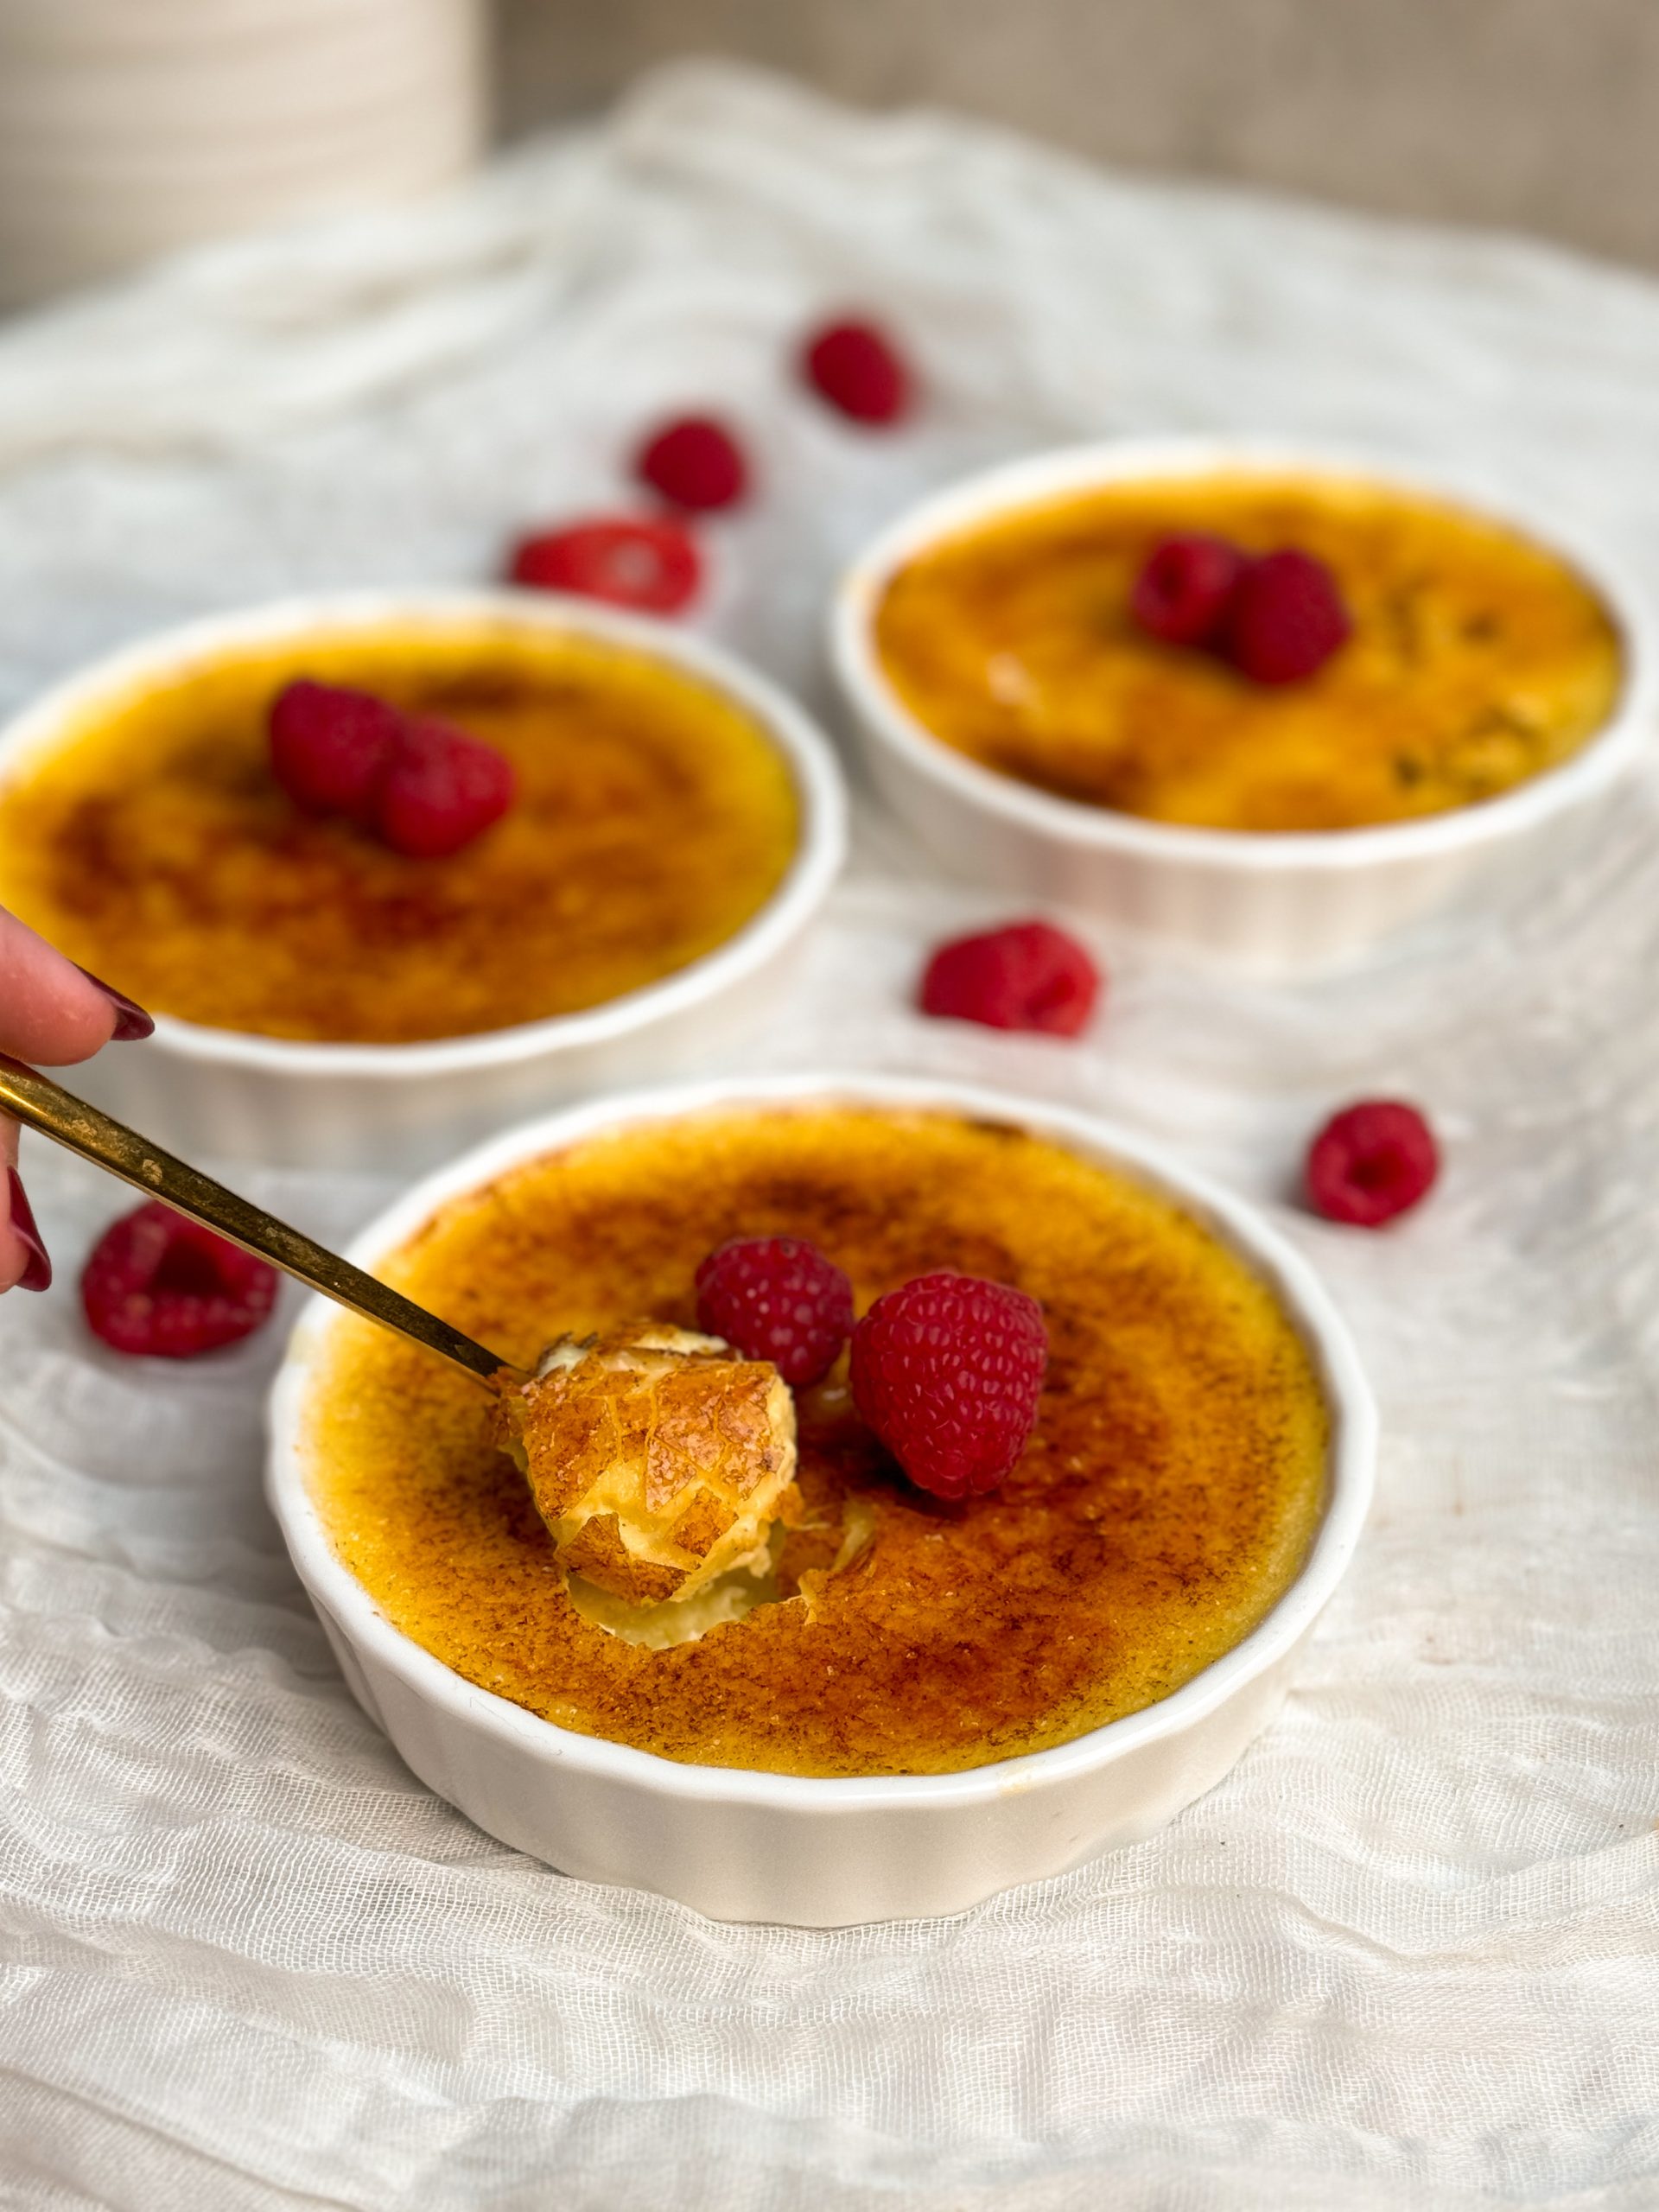 Three creme brulees in a white ramekins with a golden crispy sugar coating, decorated with raspberries. A small golden spoon is taking out a bite from the one in the front showing the thin crispy coating